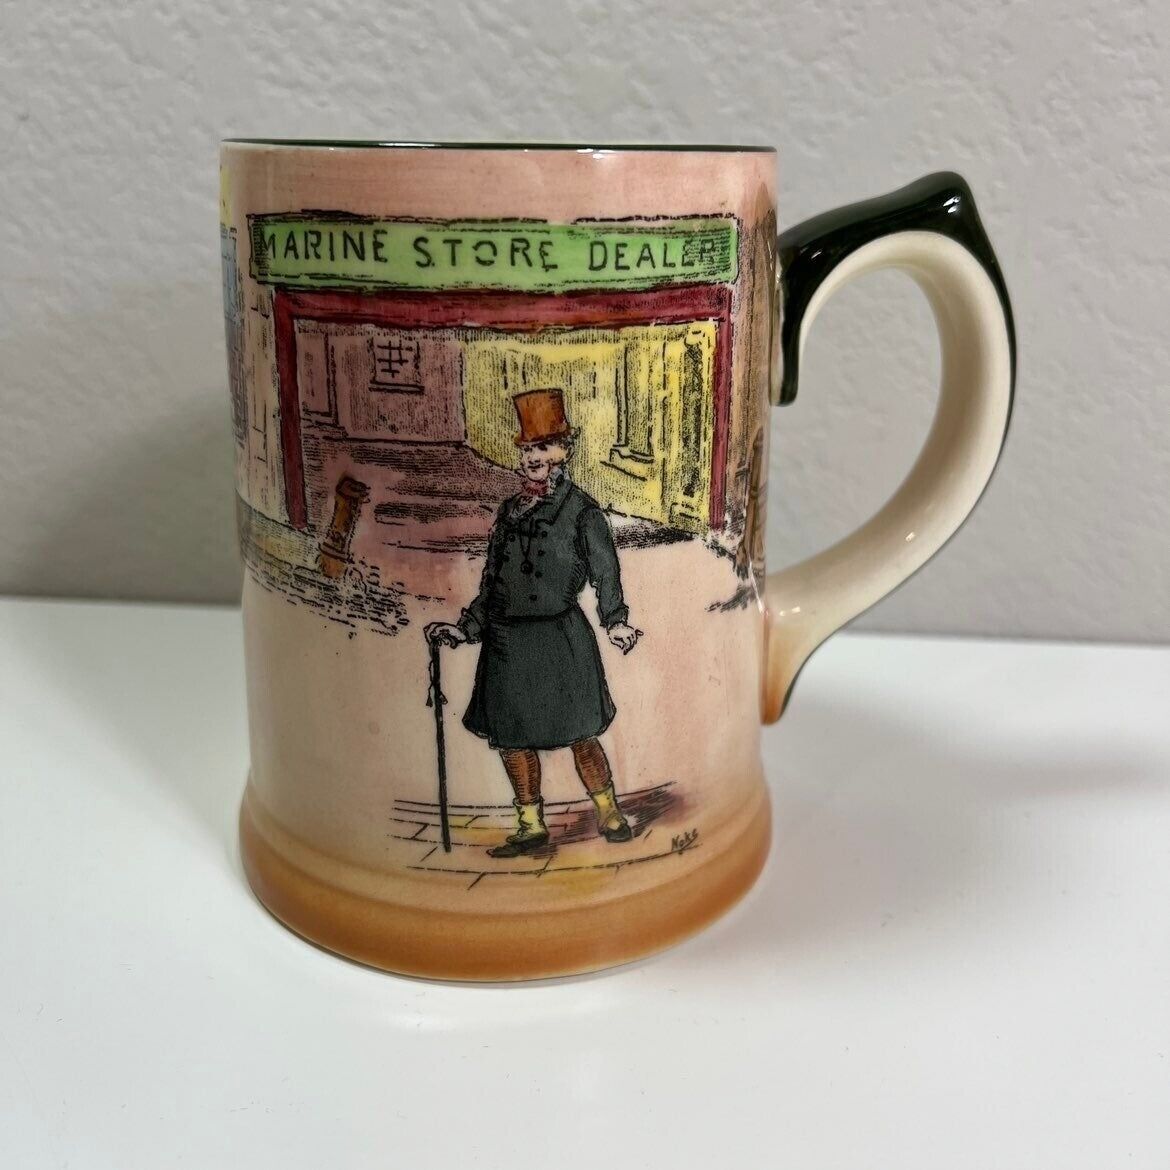 Royal Doulton Mug Mr Wilkins Micawber Dickens Ware Collectible David Copperfield